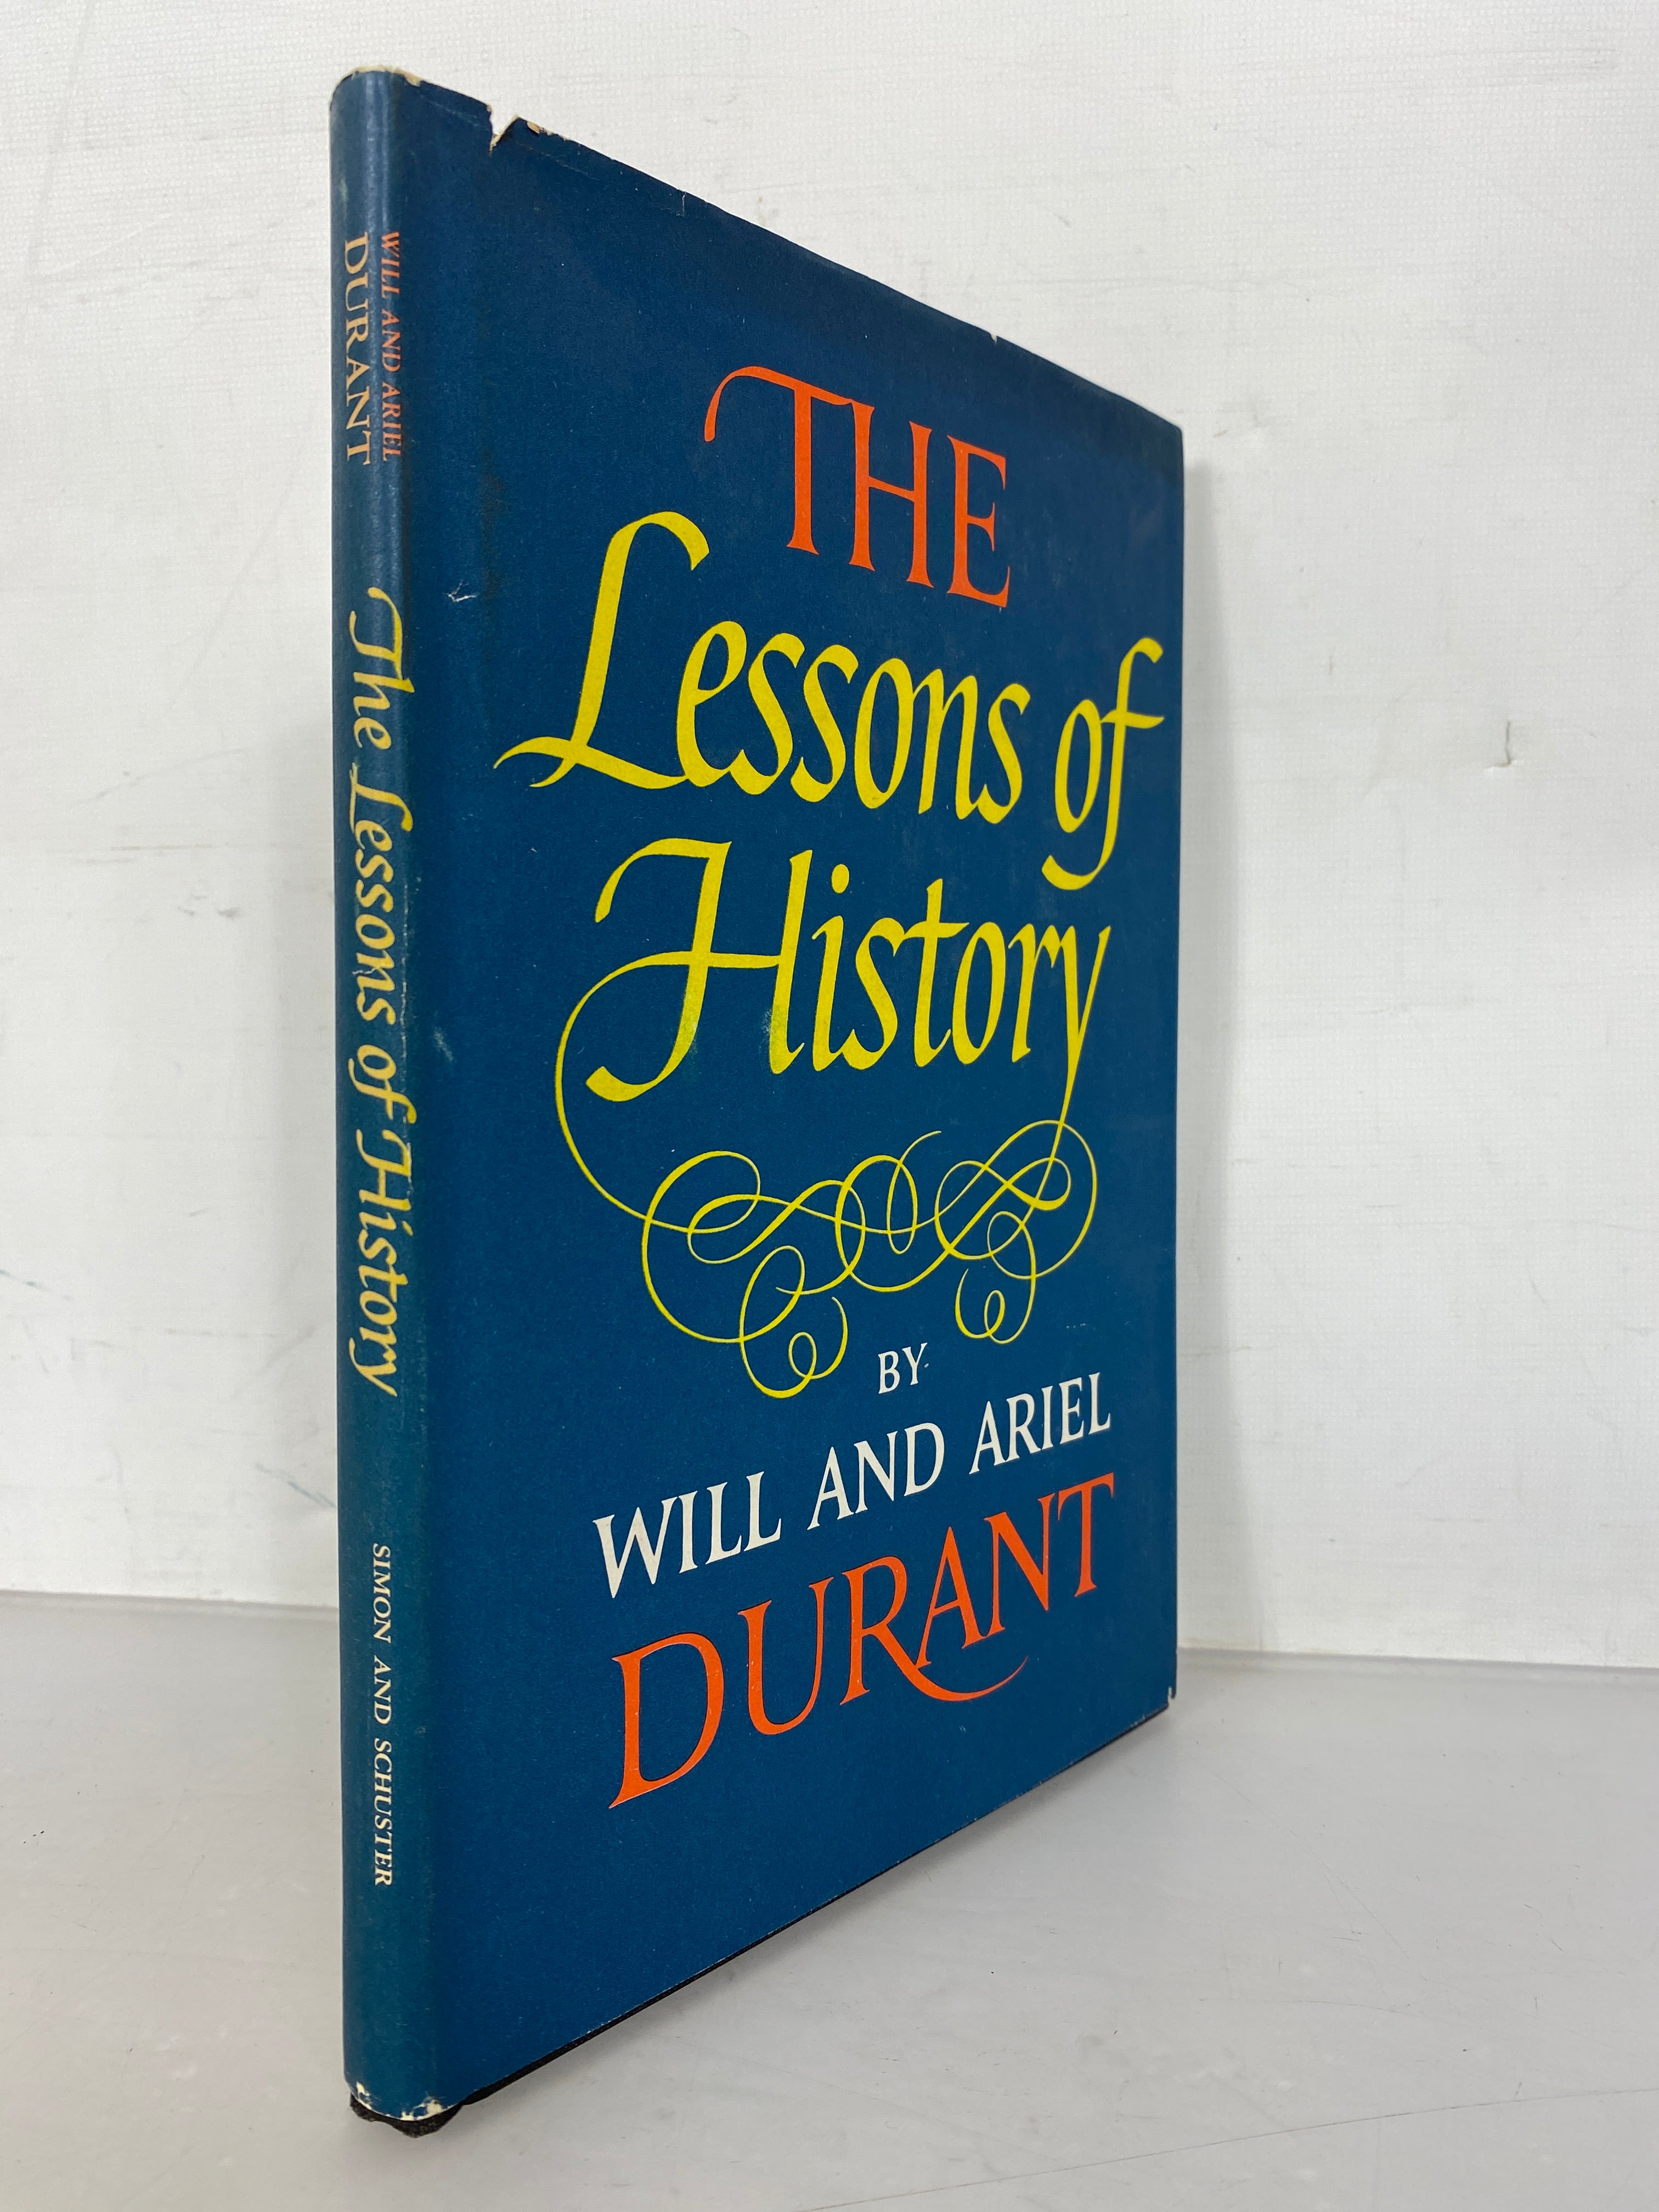 The Lessons of History by Will and Ariel Durant First Edition 1968 HC DJ